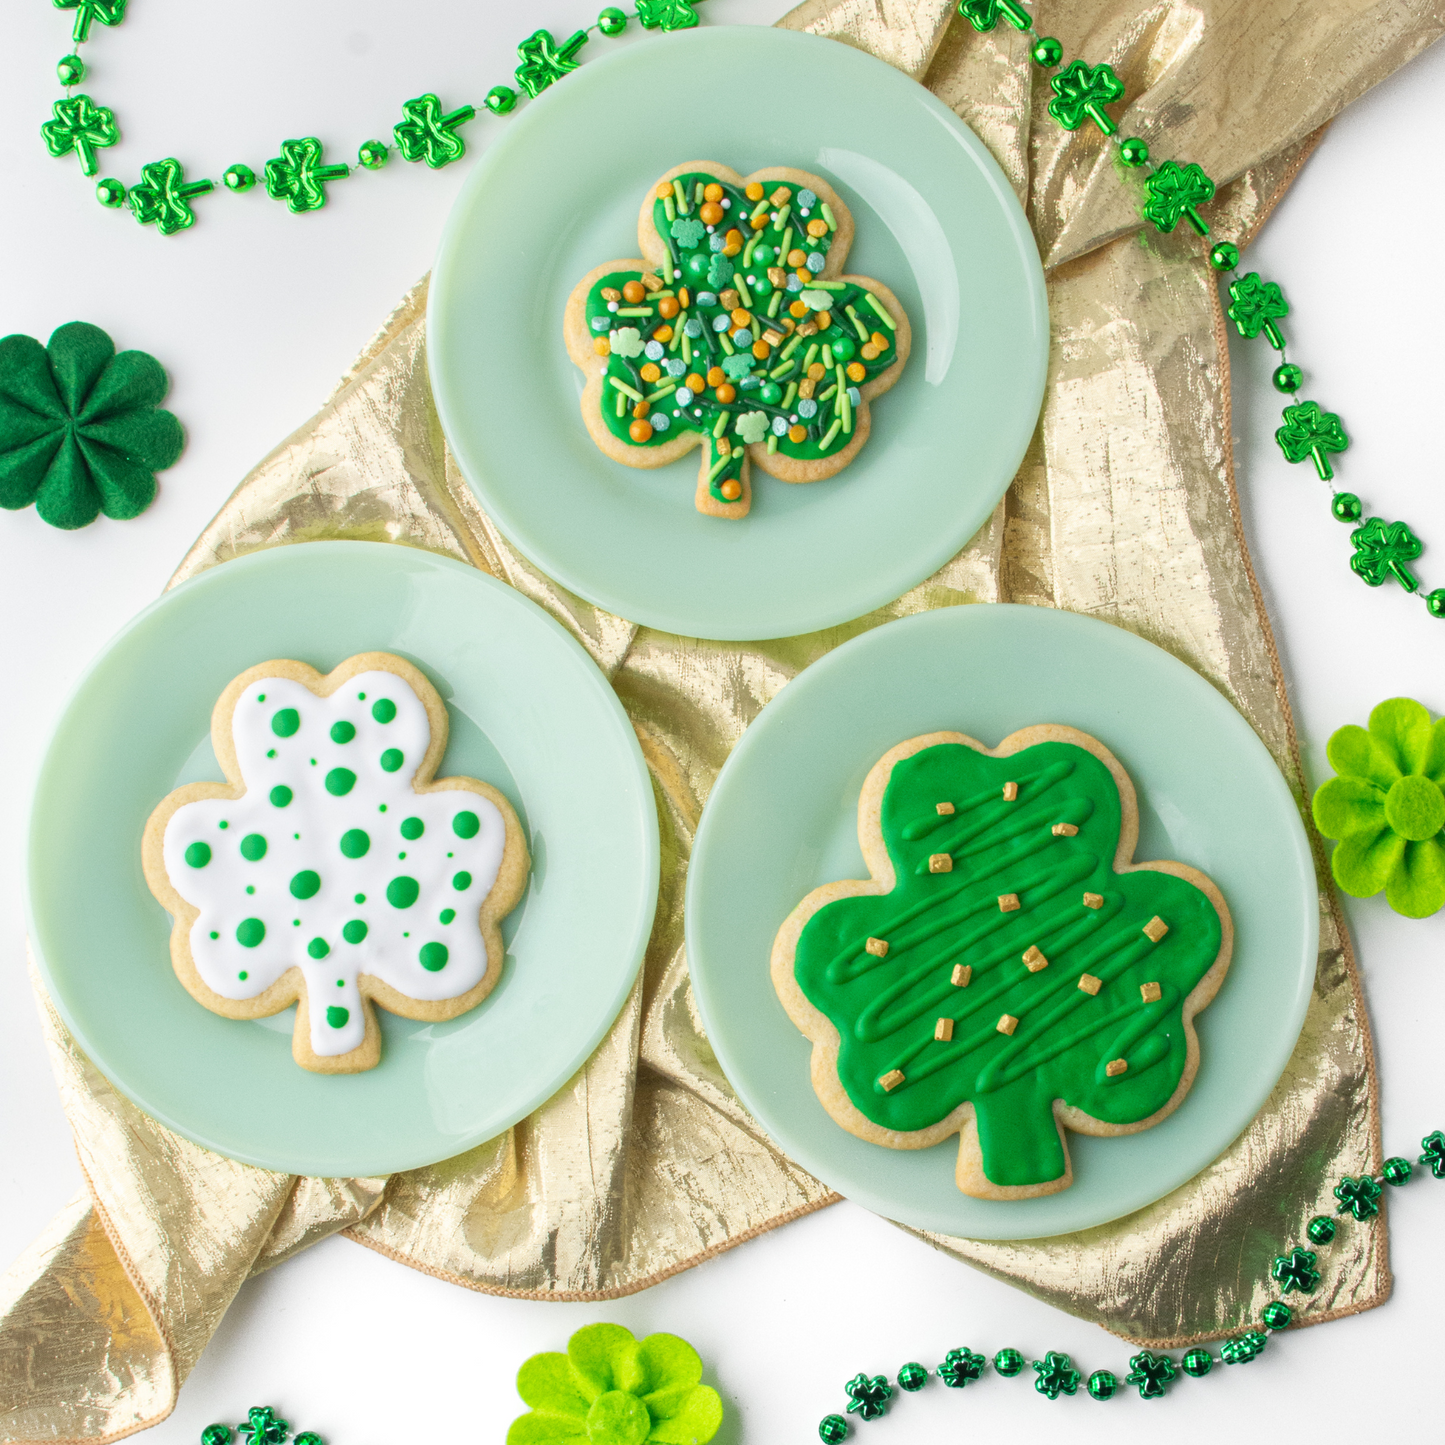 Colorful Shamrock Cookie Cutters - 3 Pack